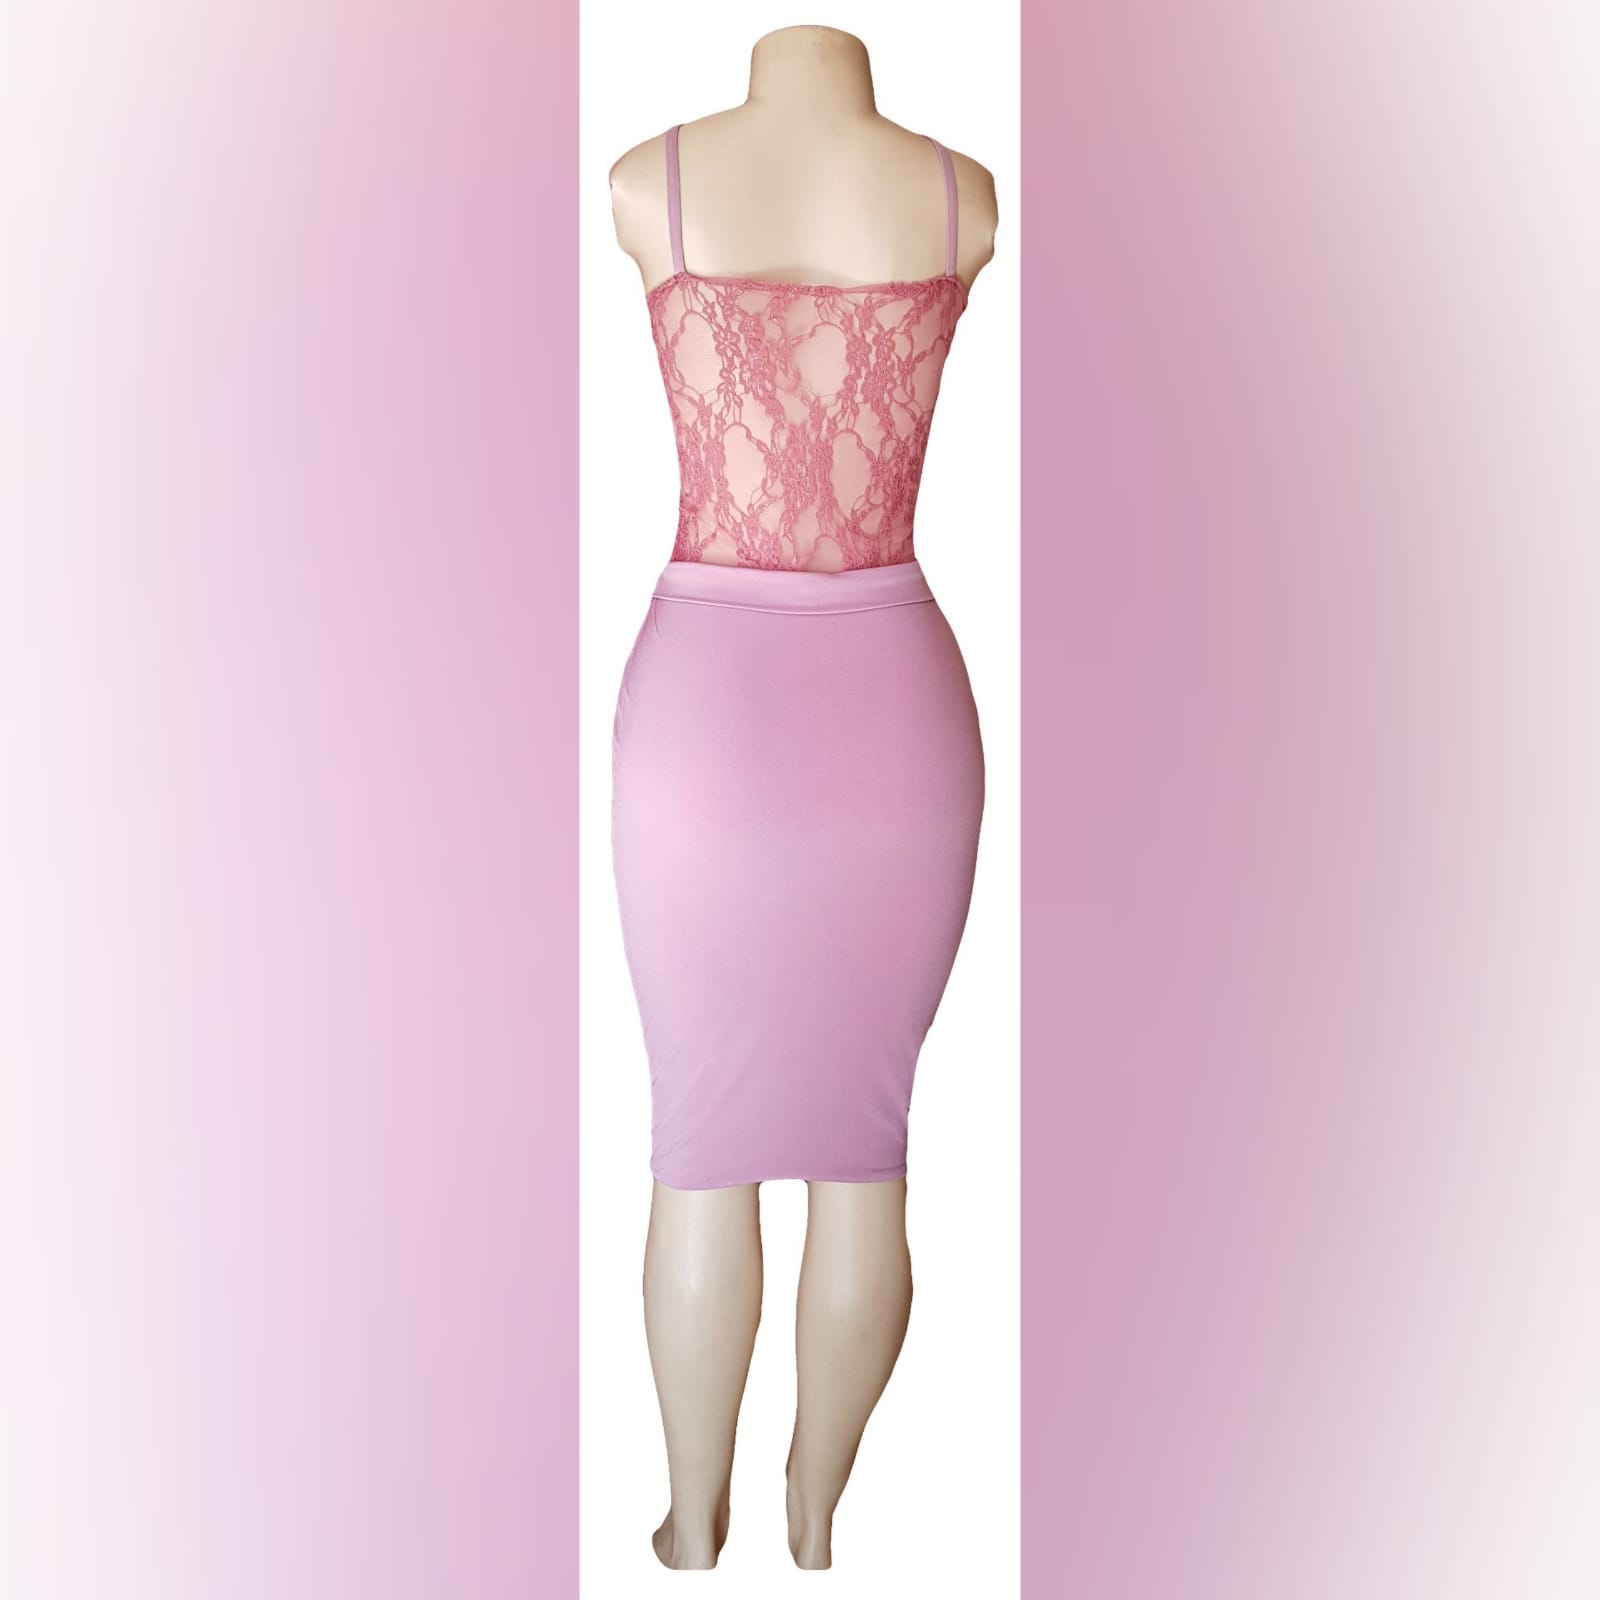 Knee length pink fitted smart casual dress 3 knee length pink fitted smart casual dress with a sheer lace bodice with a waistband and shoulder straps.